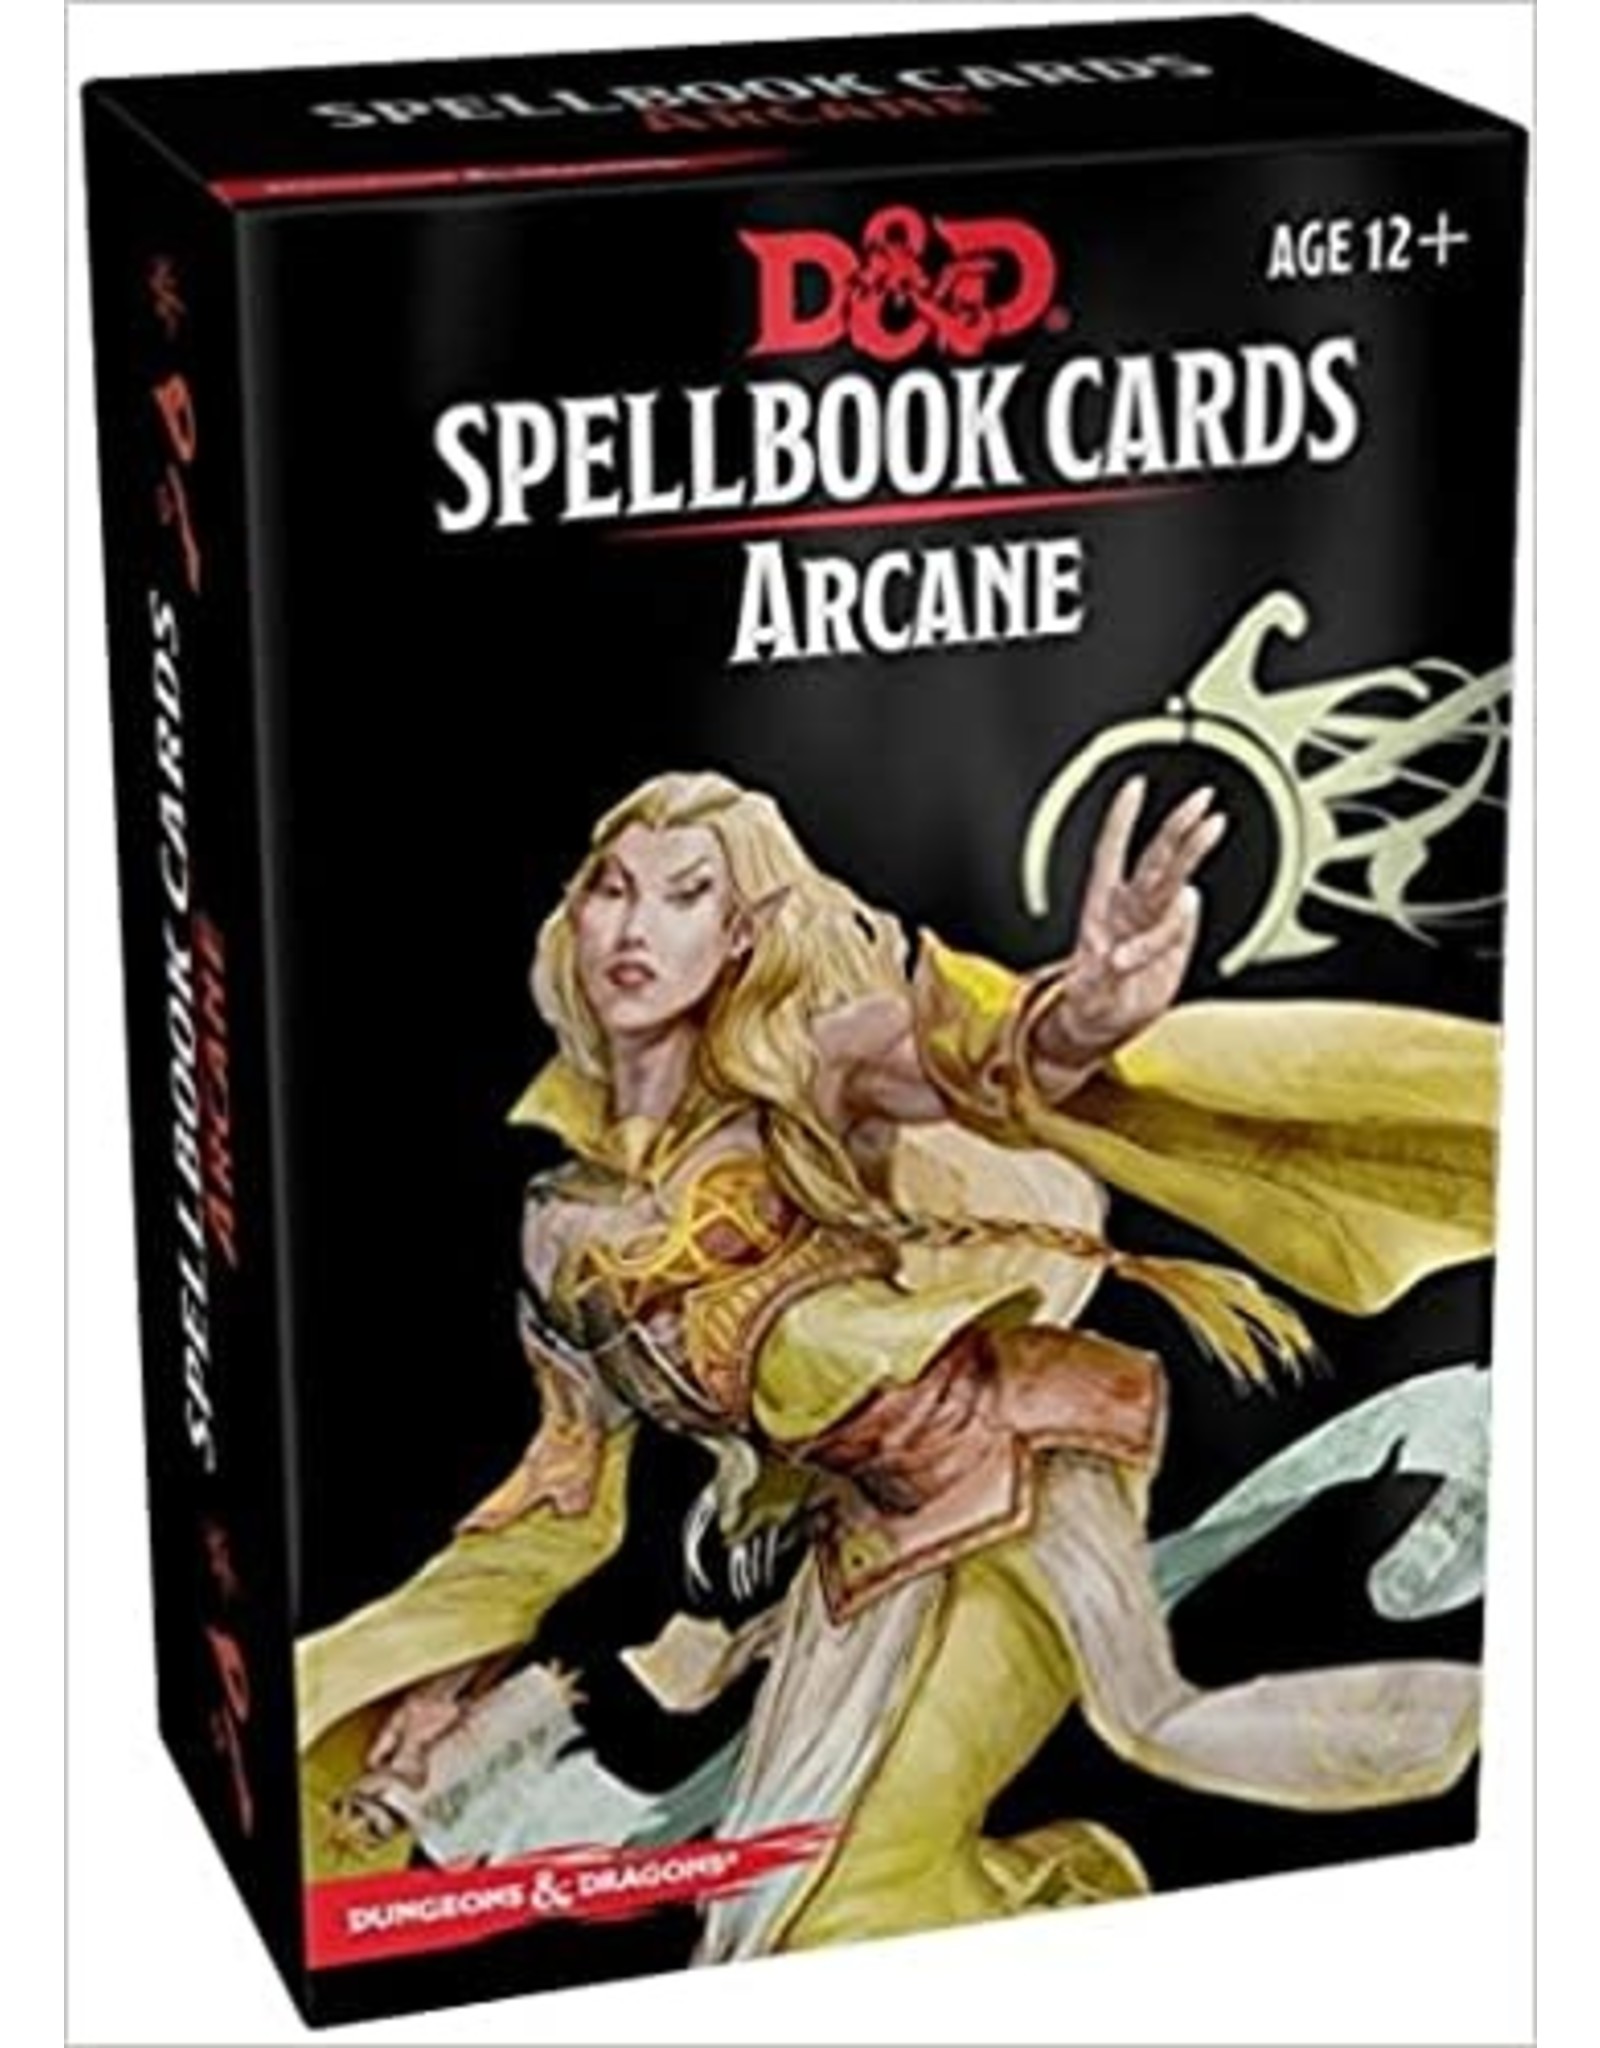 Gale Force Nine Dungeons and Dragons RPG: Spellbook Cards - Arcane Deck (253 cards)